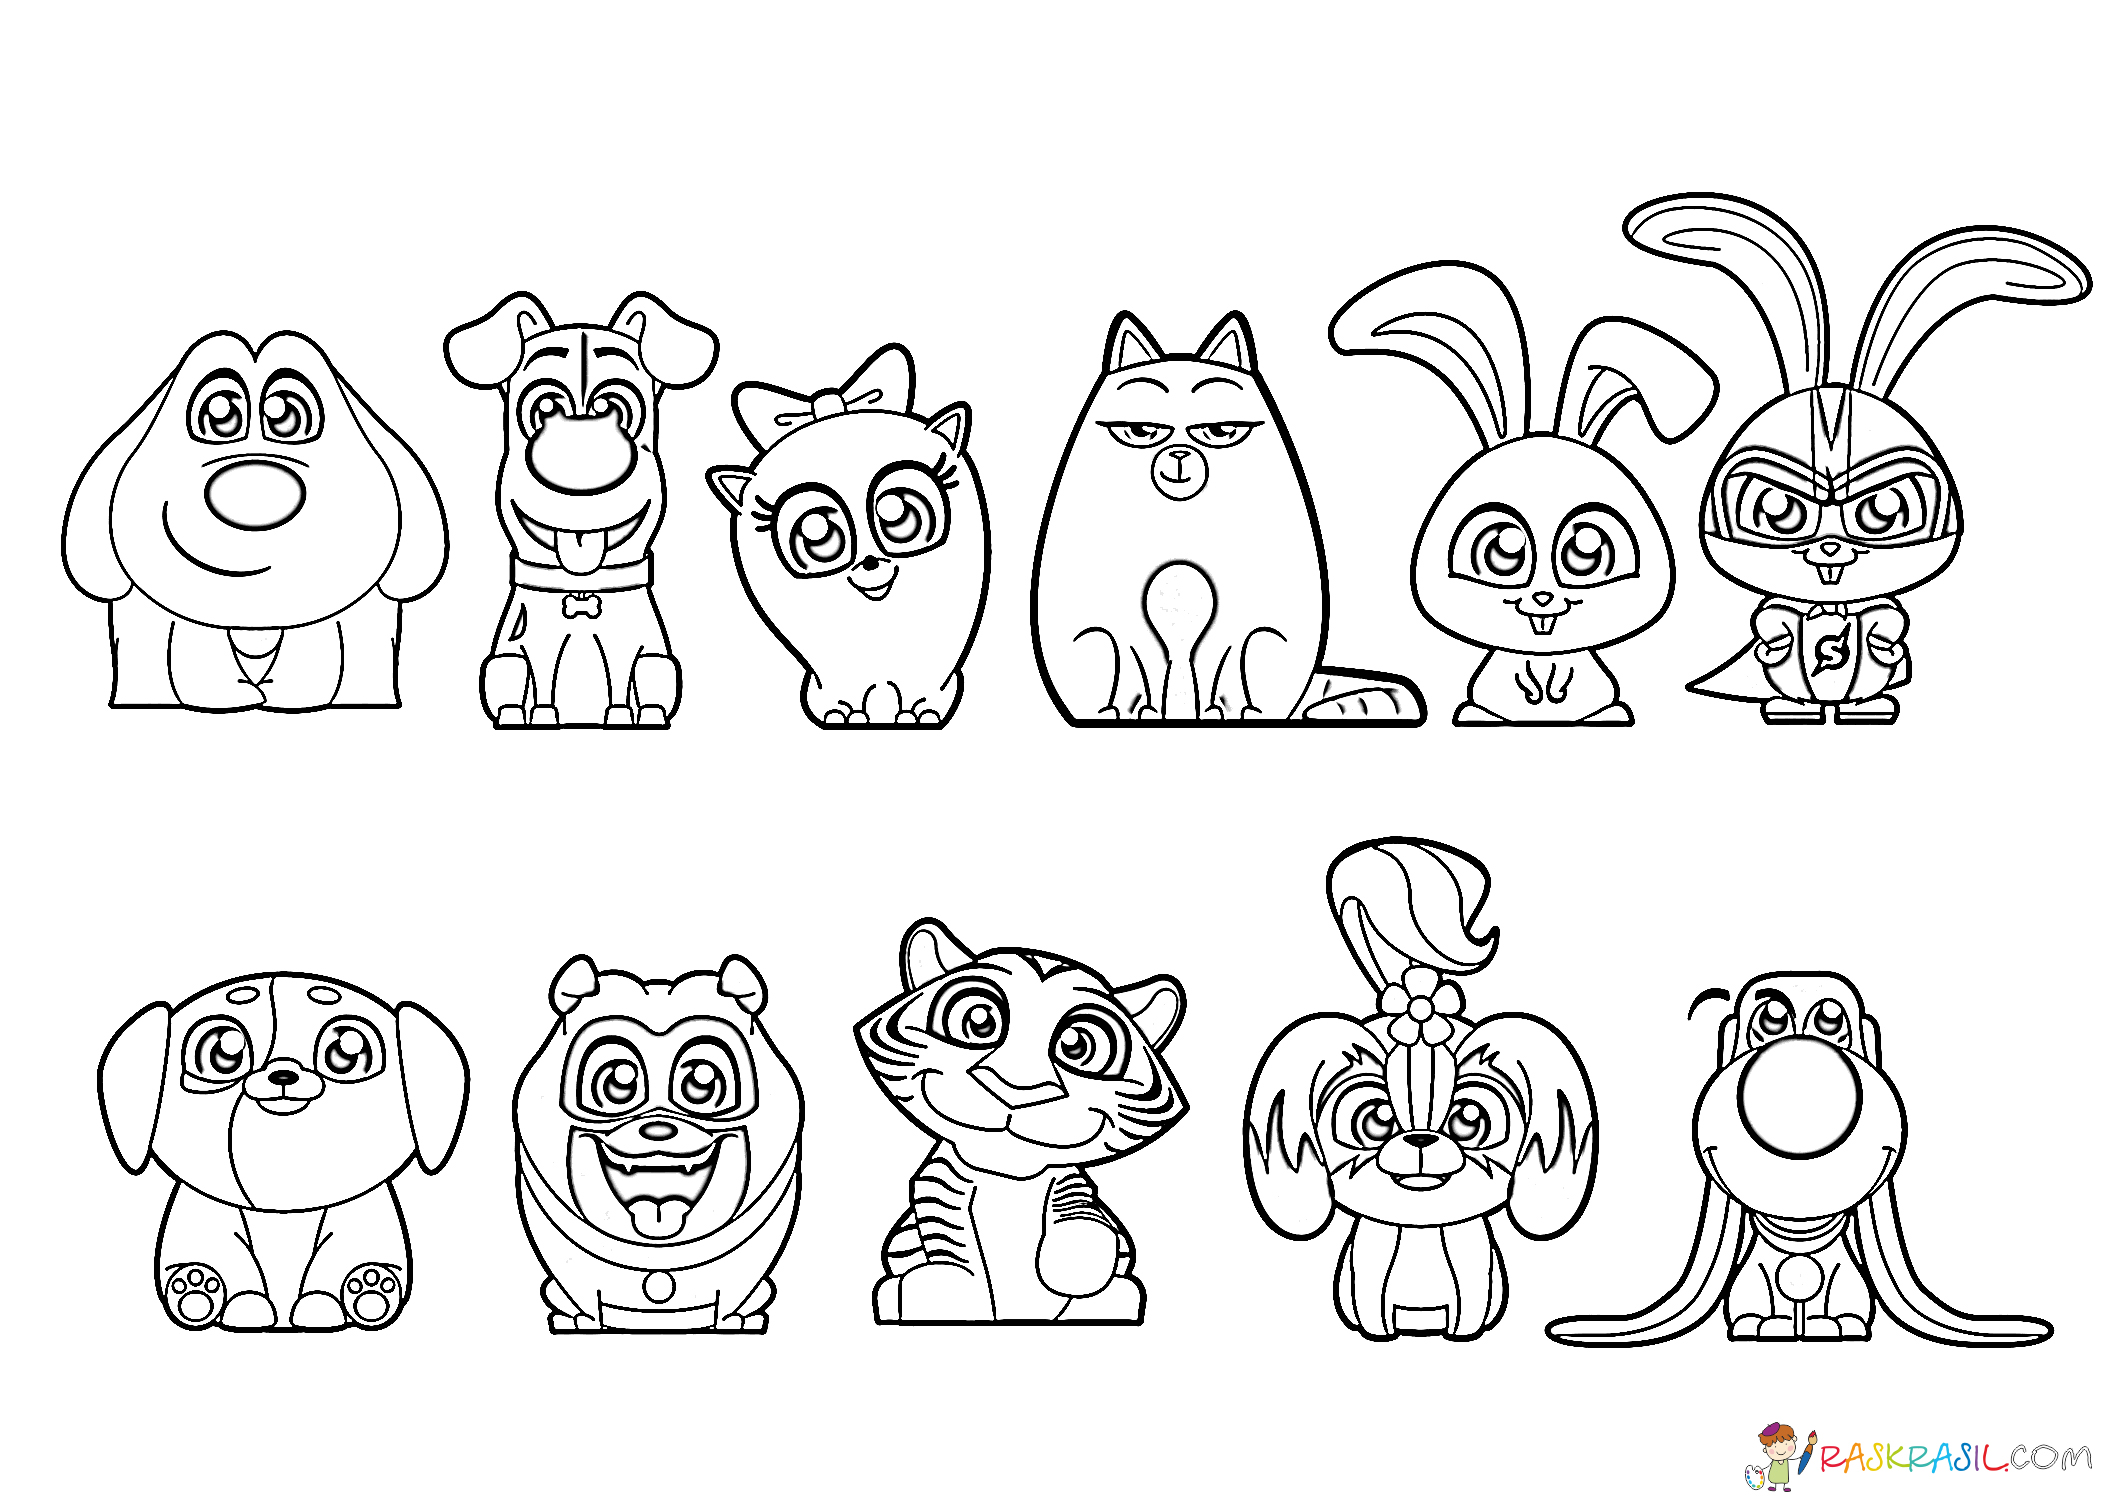 The Secret Life of Pets Coloring Pages. Print Them for Free